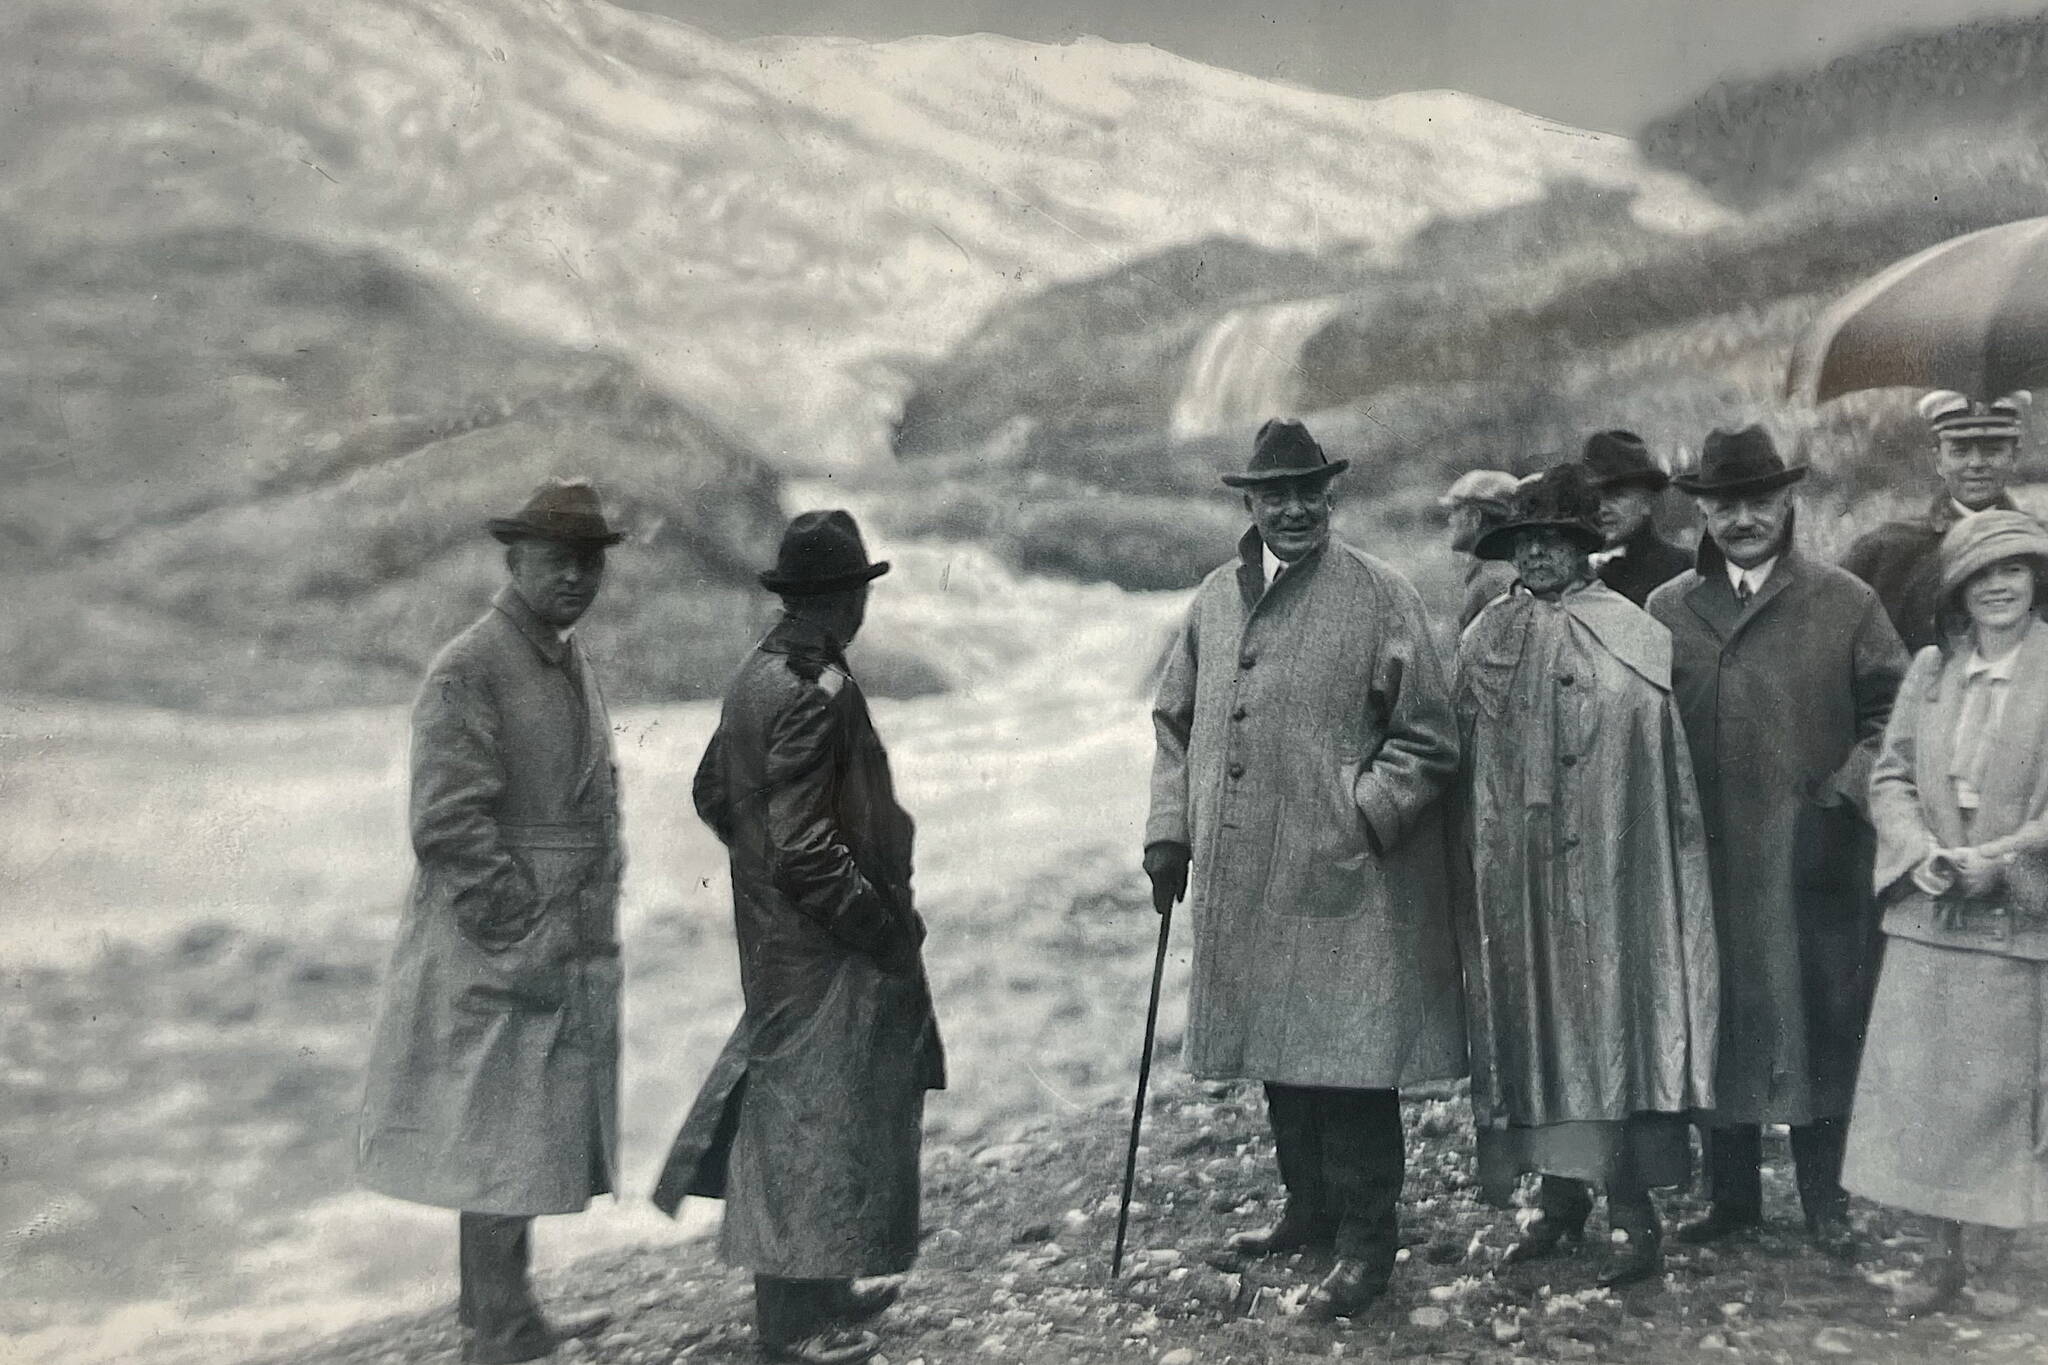 Alaska State Library Historical Collection P418-3
President Warren G. Harding (with walking stick) stands beside his wife (in cape) before Mendenhall Glacier on July 10, 1923. To Mrs. Harding’s side is Alaska Territorial Gov. Scott Bone (with mustache) and his niece Marguerite Bone.